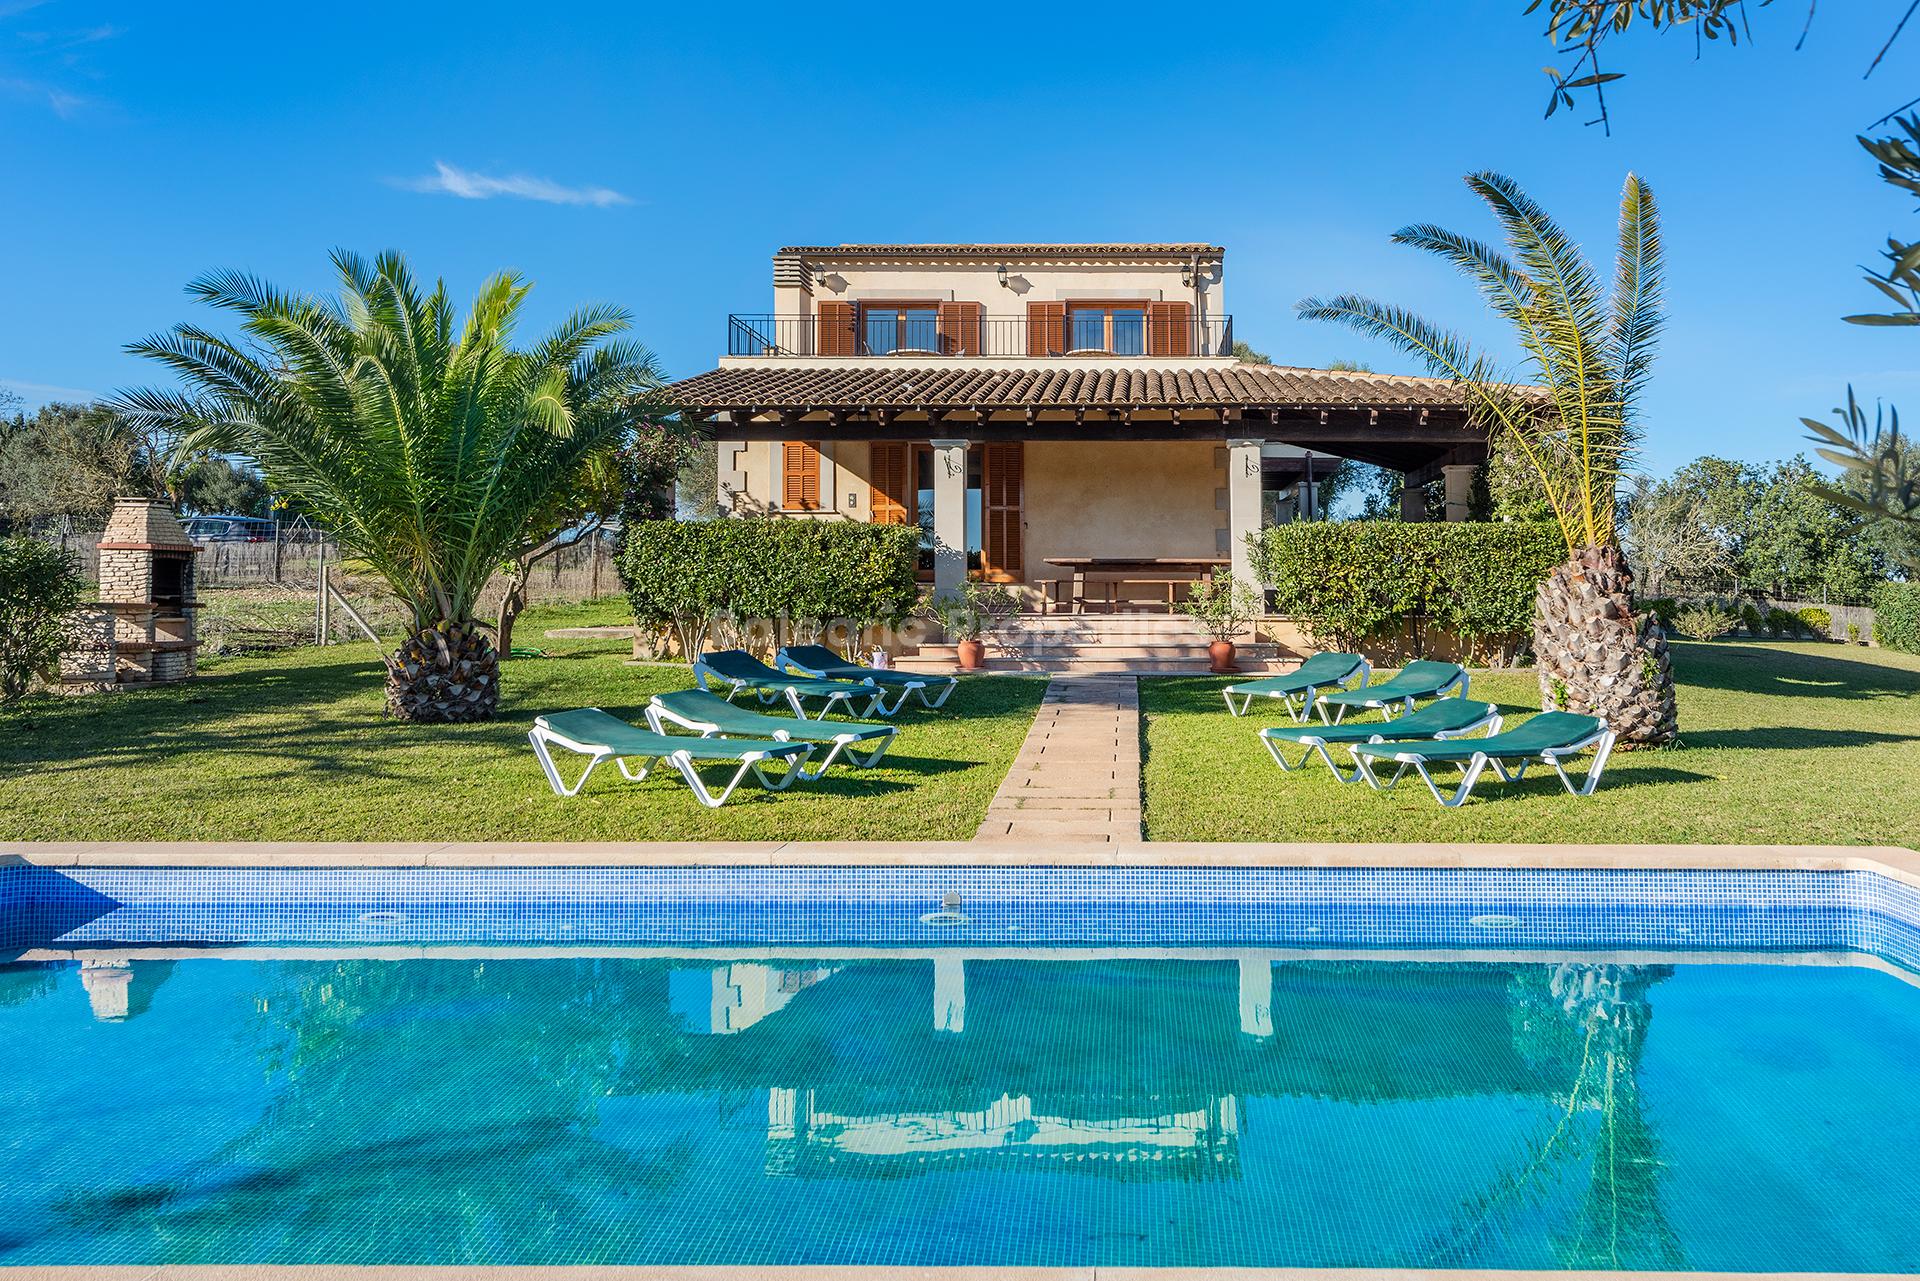 Country villa with holiday license and pool for sale in Santa Margalida, Mallorca